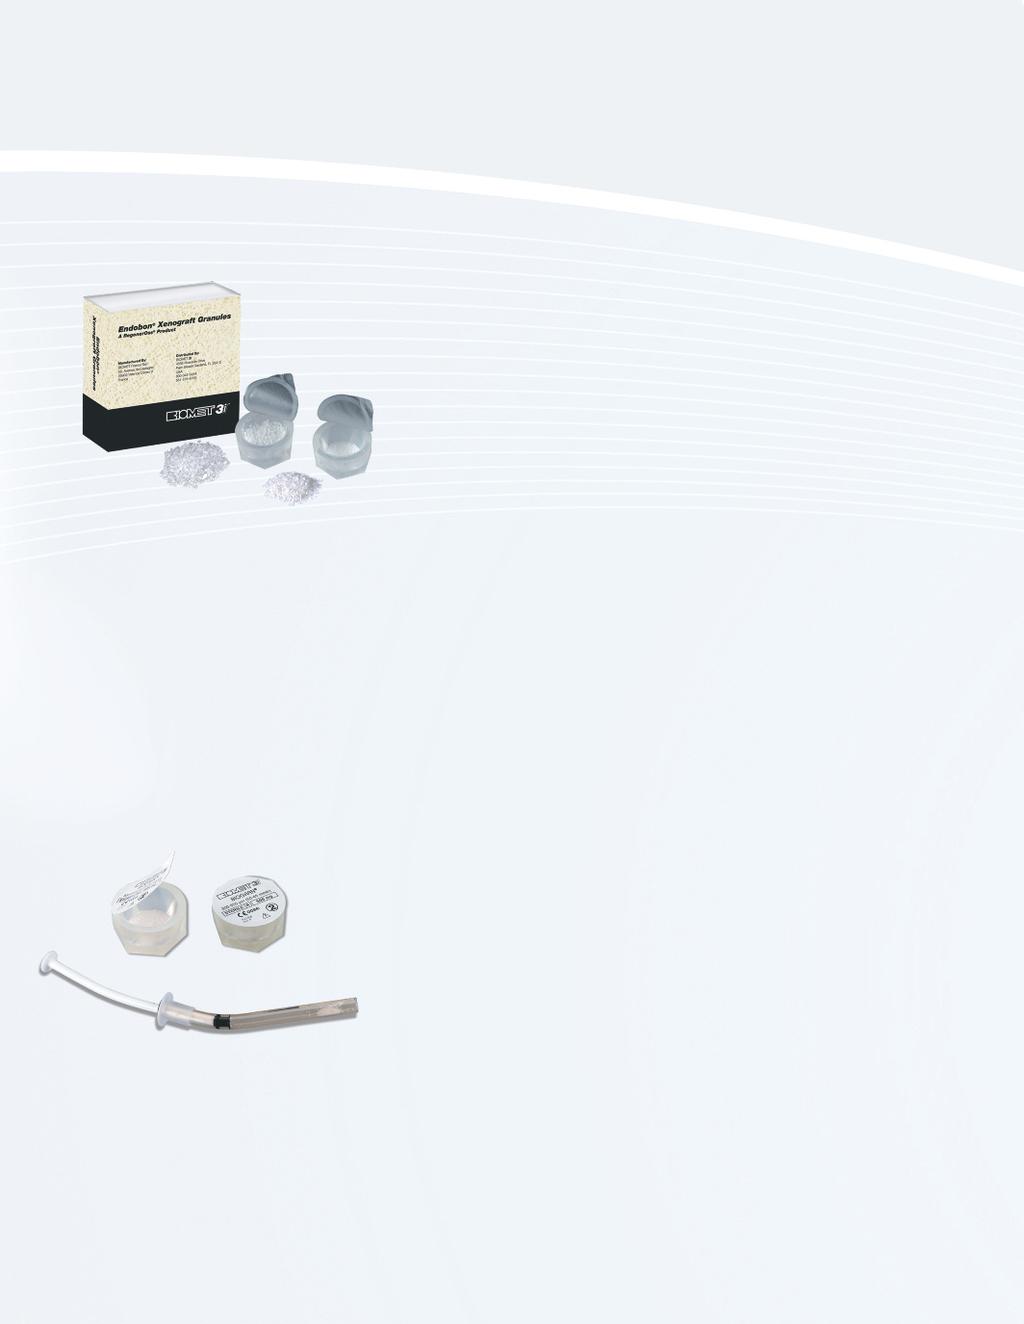 GUIDED IMPLANT TREATMENT An Assortment Of Bone Graft Substitutes Endobon Xenograft Granules Bovine-derived hydroxyapatite that has been fully deproteinated for safety An essentially non-resorbable